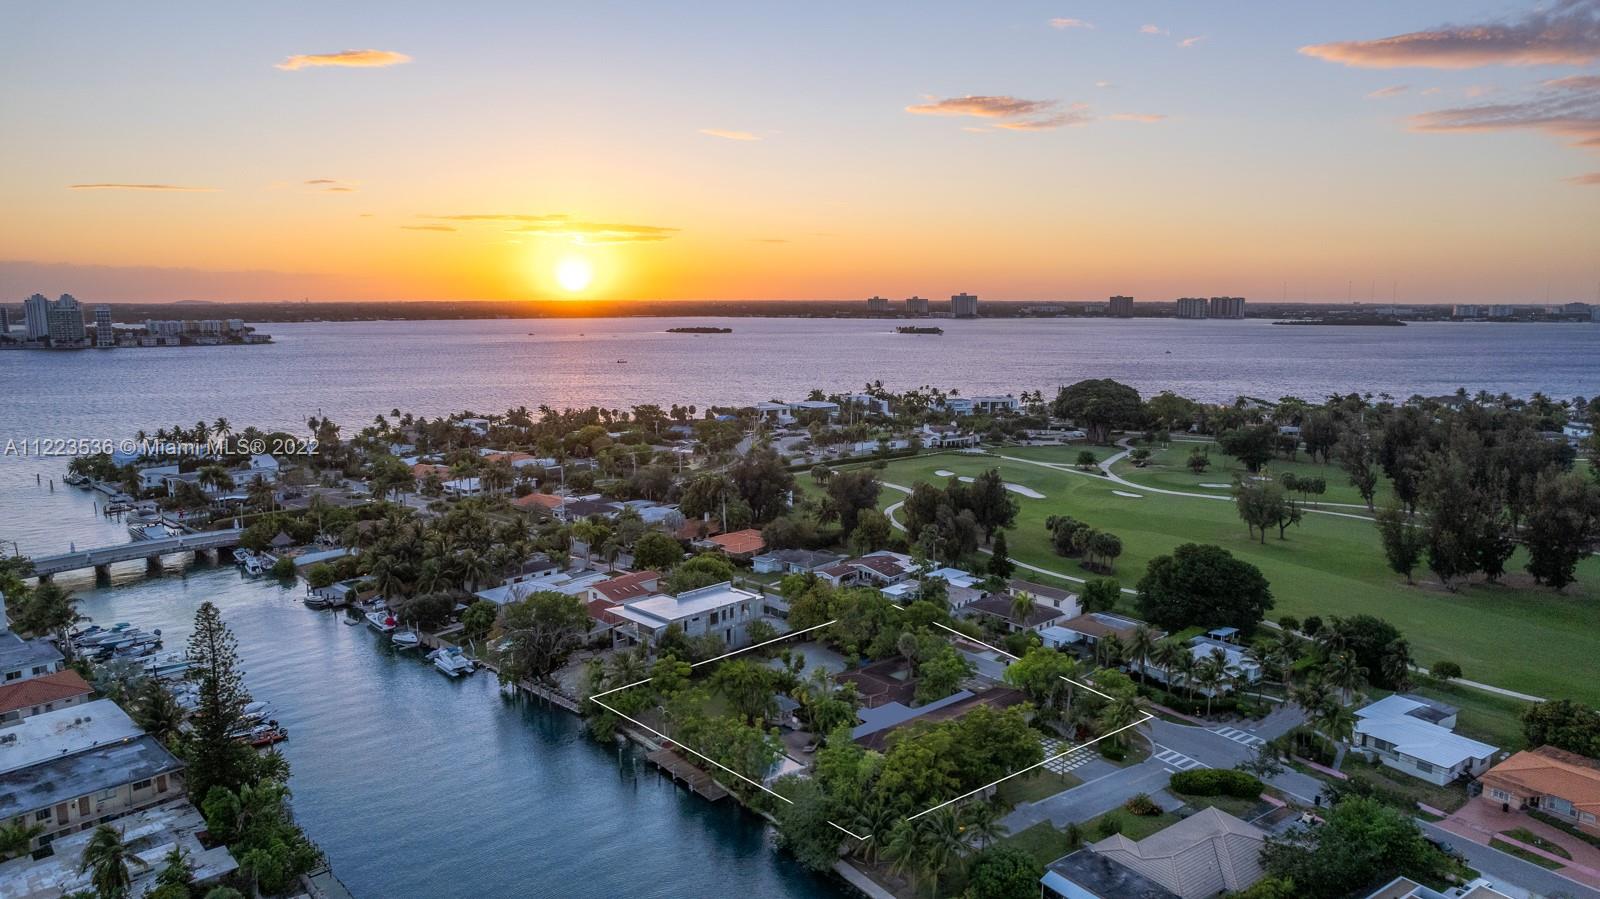 This extraordinary oversized 33,368 square foot property located in Miami Beach’s, Normandy Isles, offers an
impressive 170-feet of water-frontage with access to Biscayne Bay. Amazing opportunity to build one incredible
mansion on this site, or subdivide into three lots. This gated neighborhood offers a park, public Golf and Tennis
courts.